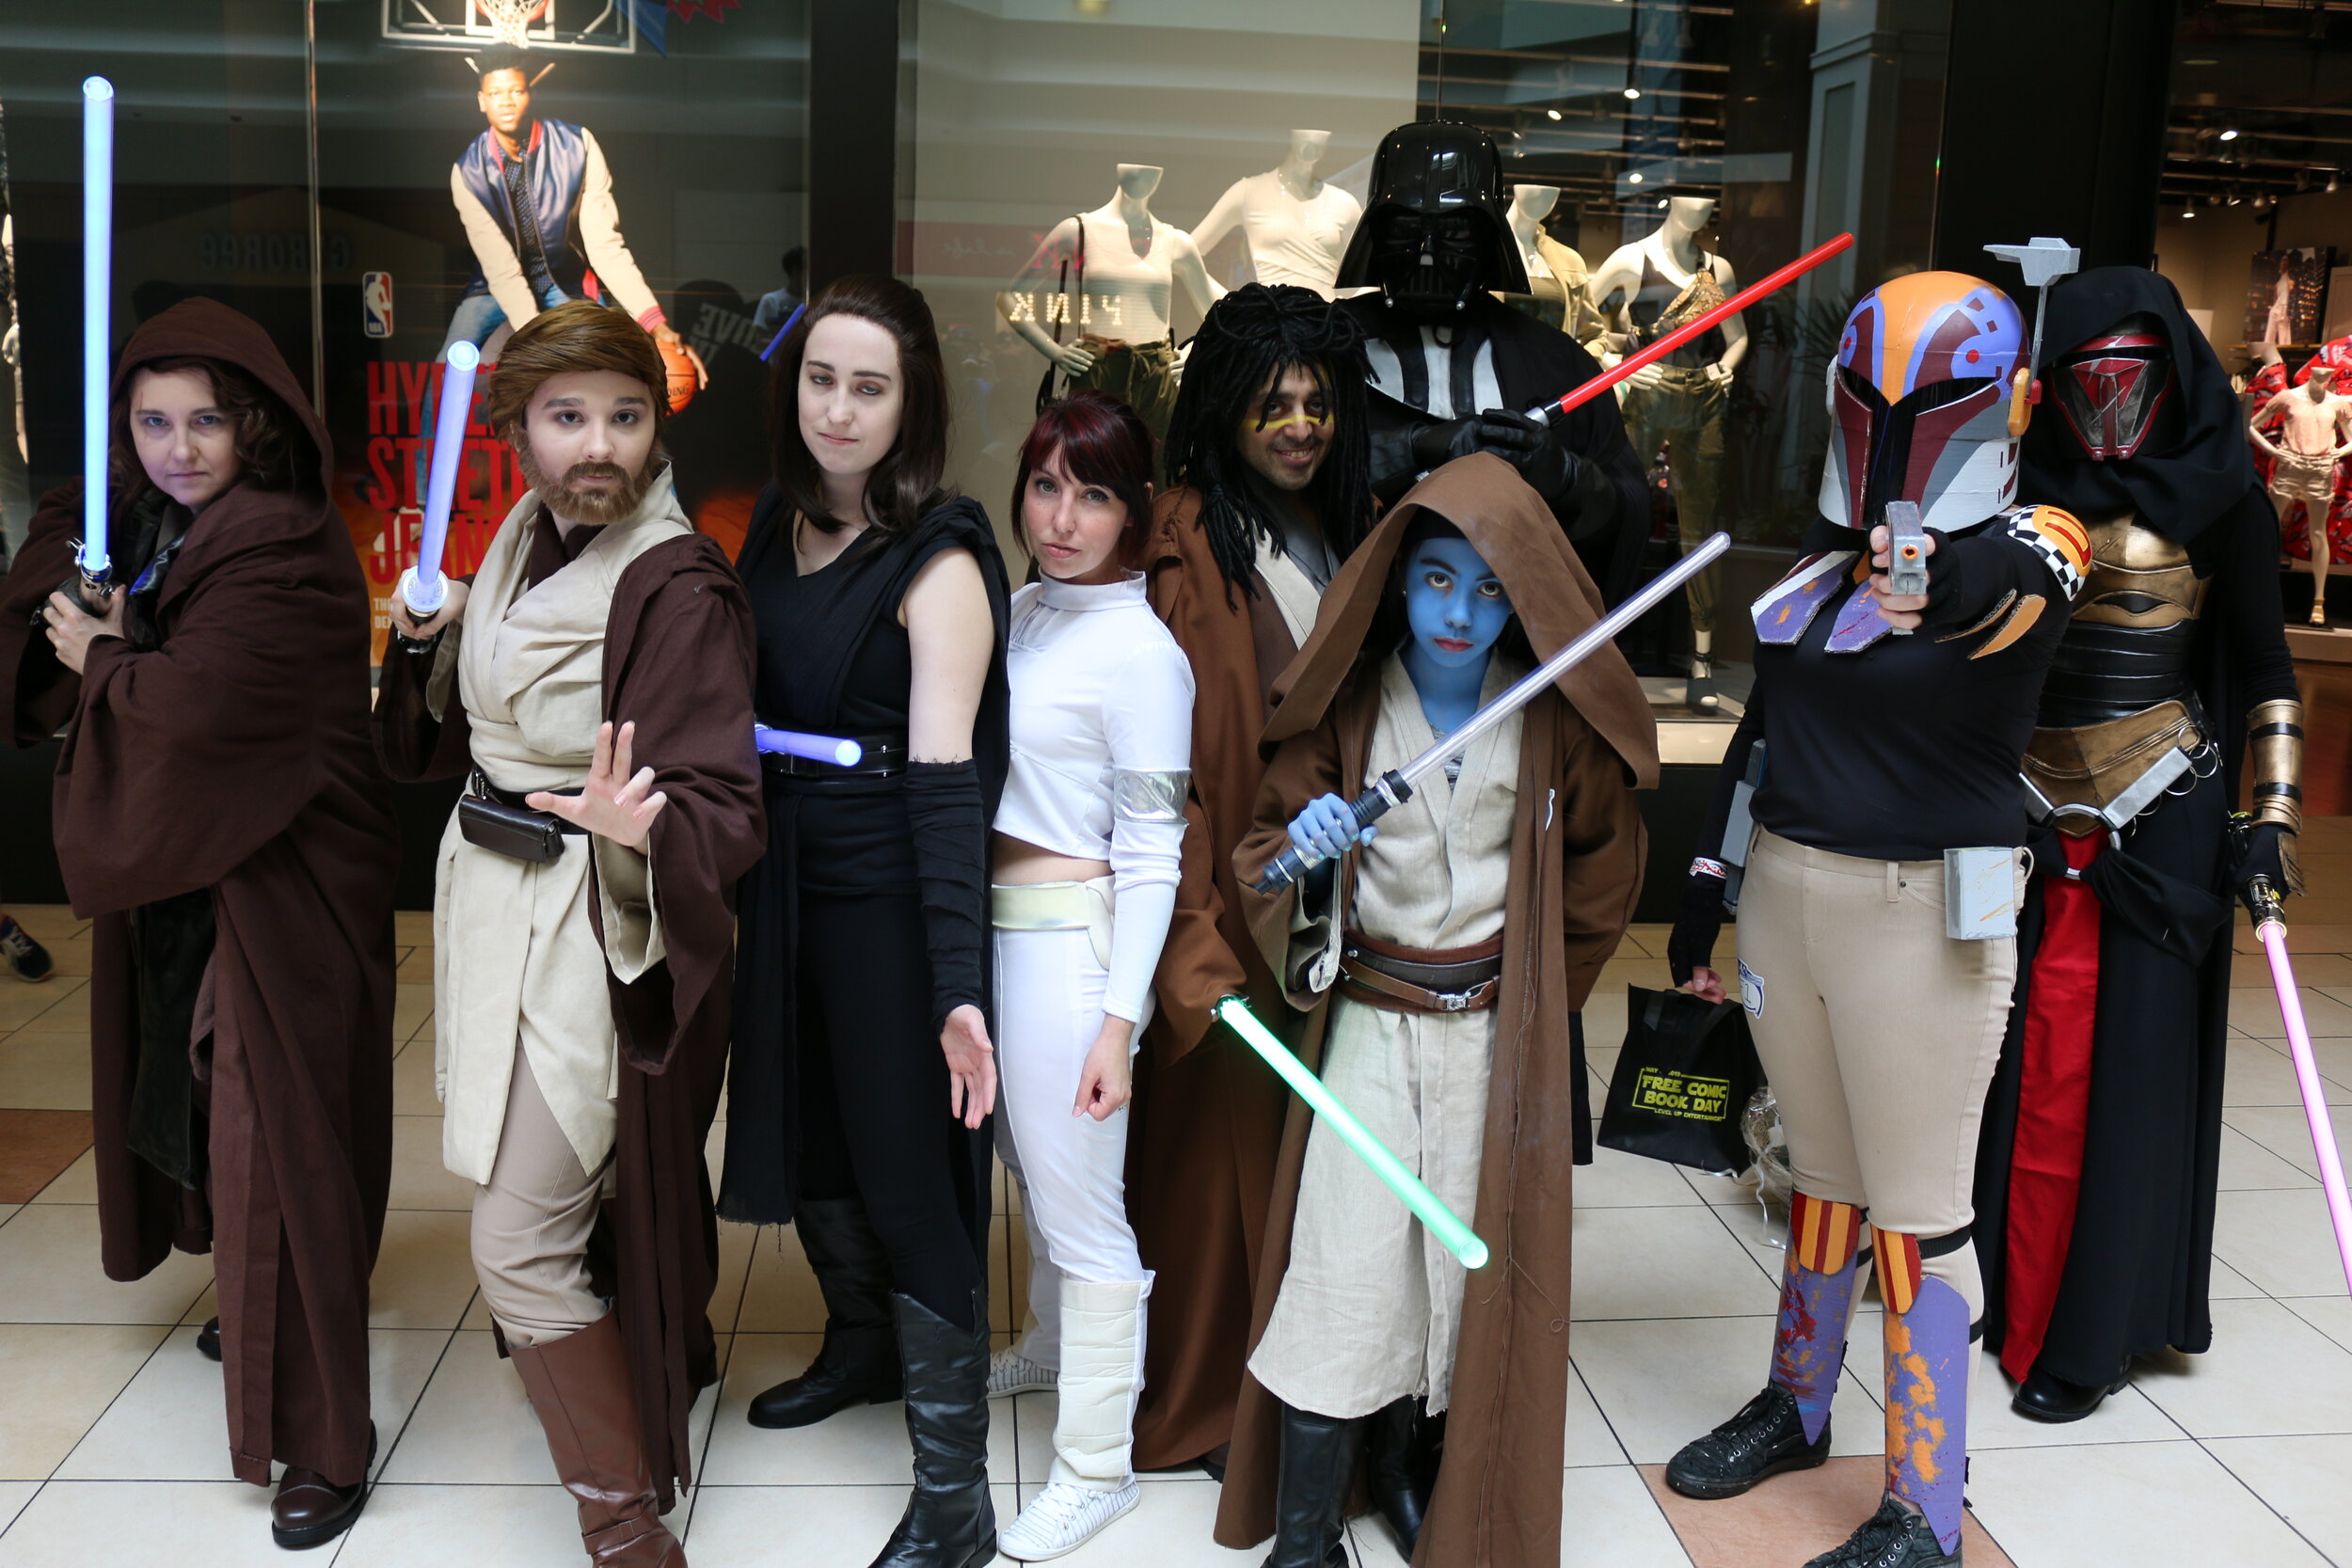  Emily, RStewie, Moaglin, Sam Starr and more as Star Wars Character at Free Comic Book Day on May the 4th 2019. 